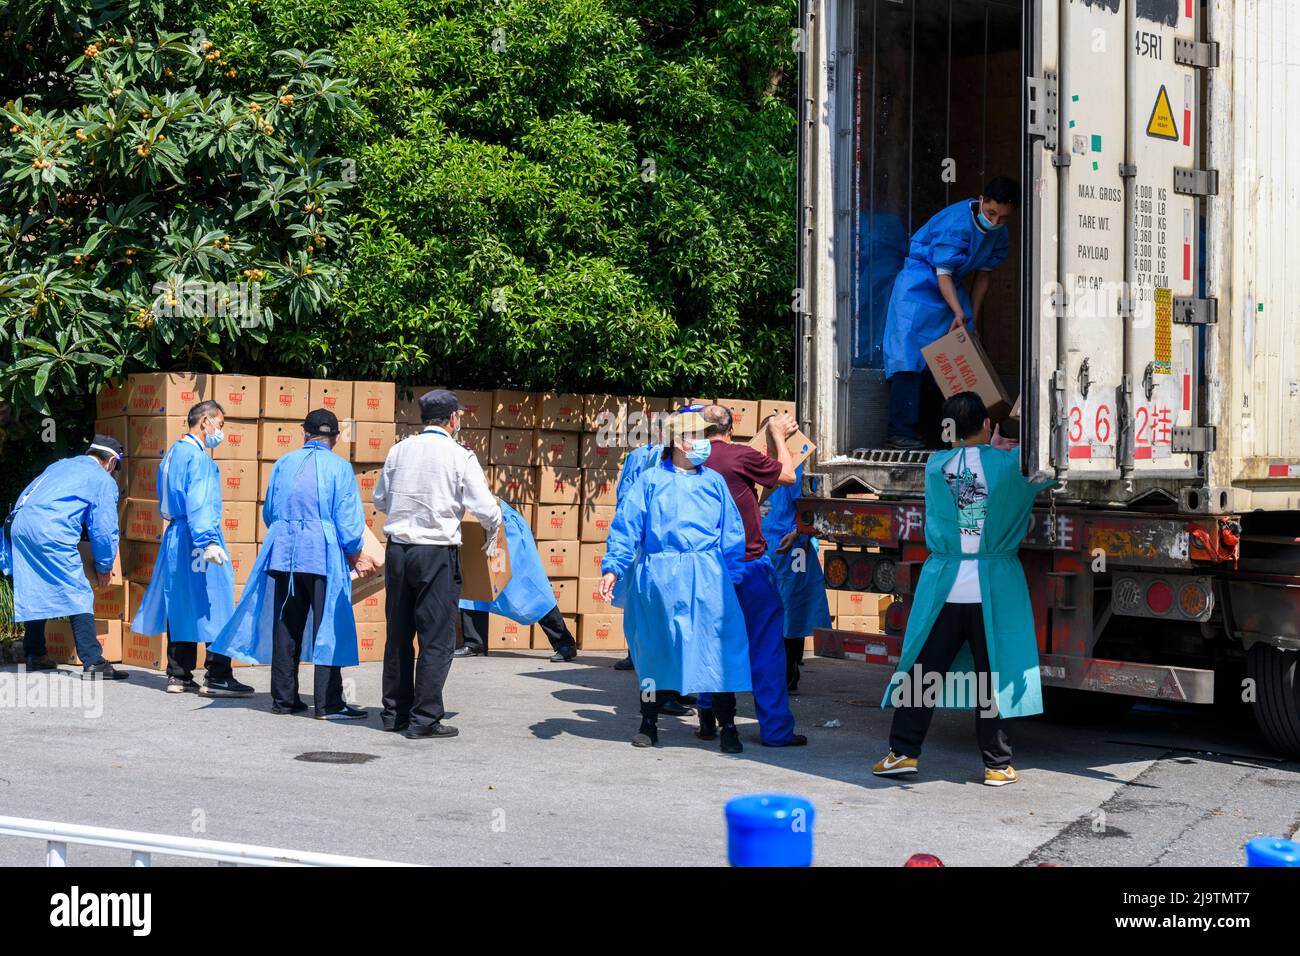 Volunteers help unload a truckful of boxes of food to be given to the residents during the Shanghai lokcdown. Stock Photo